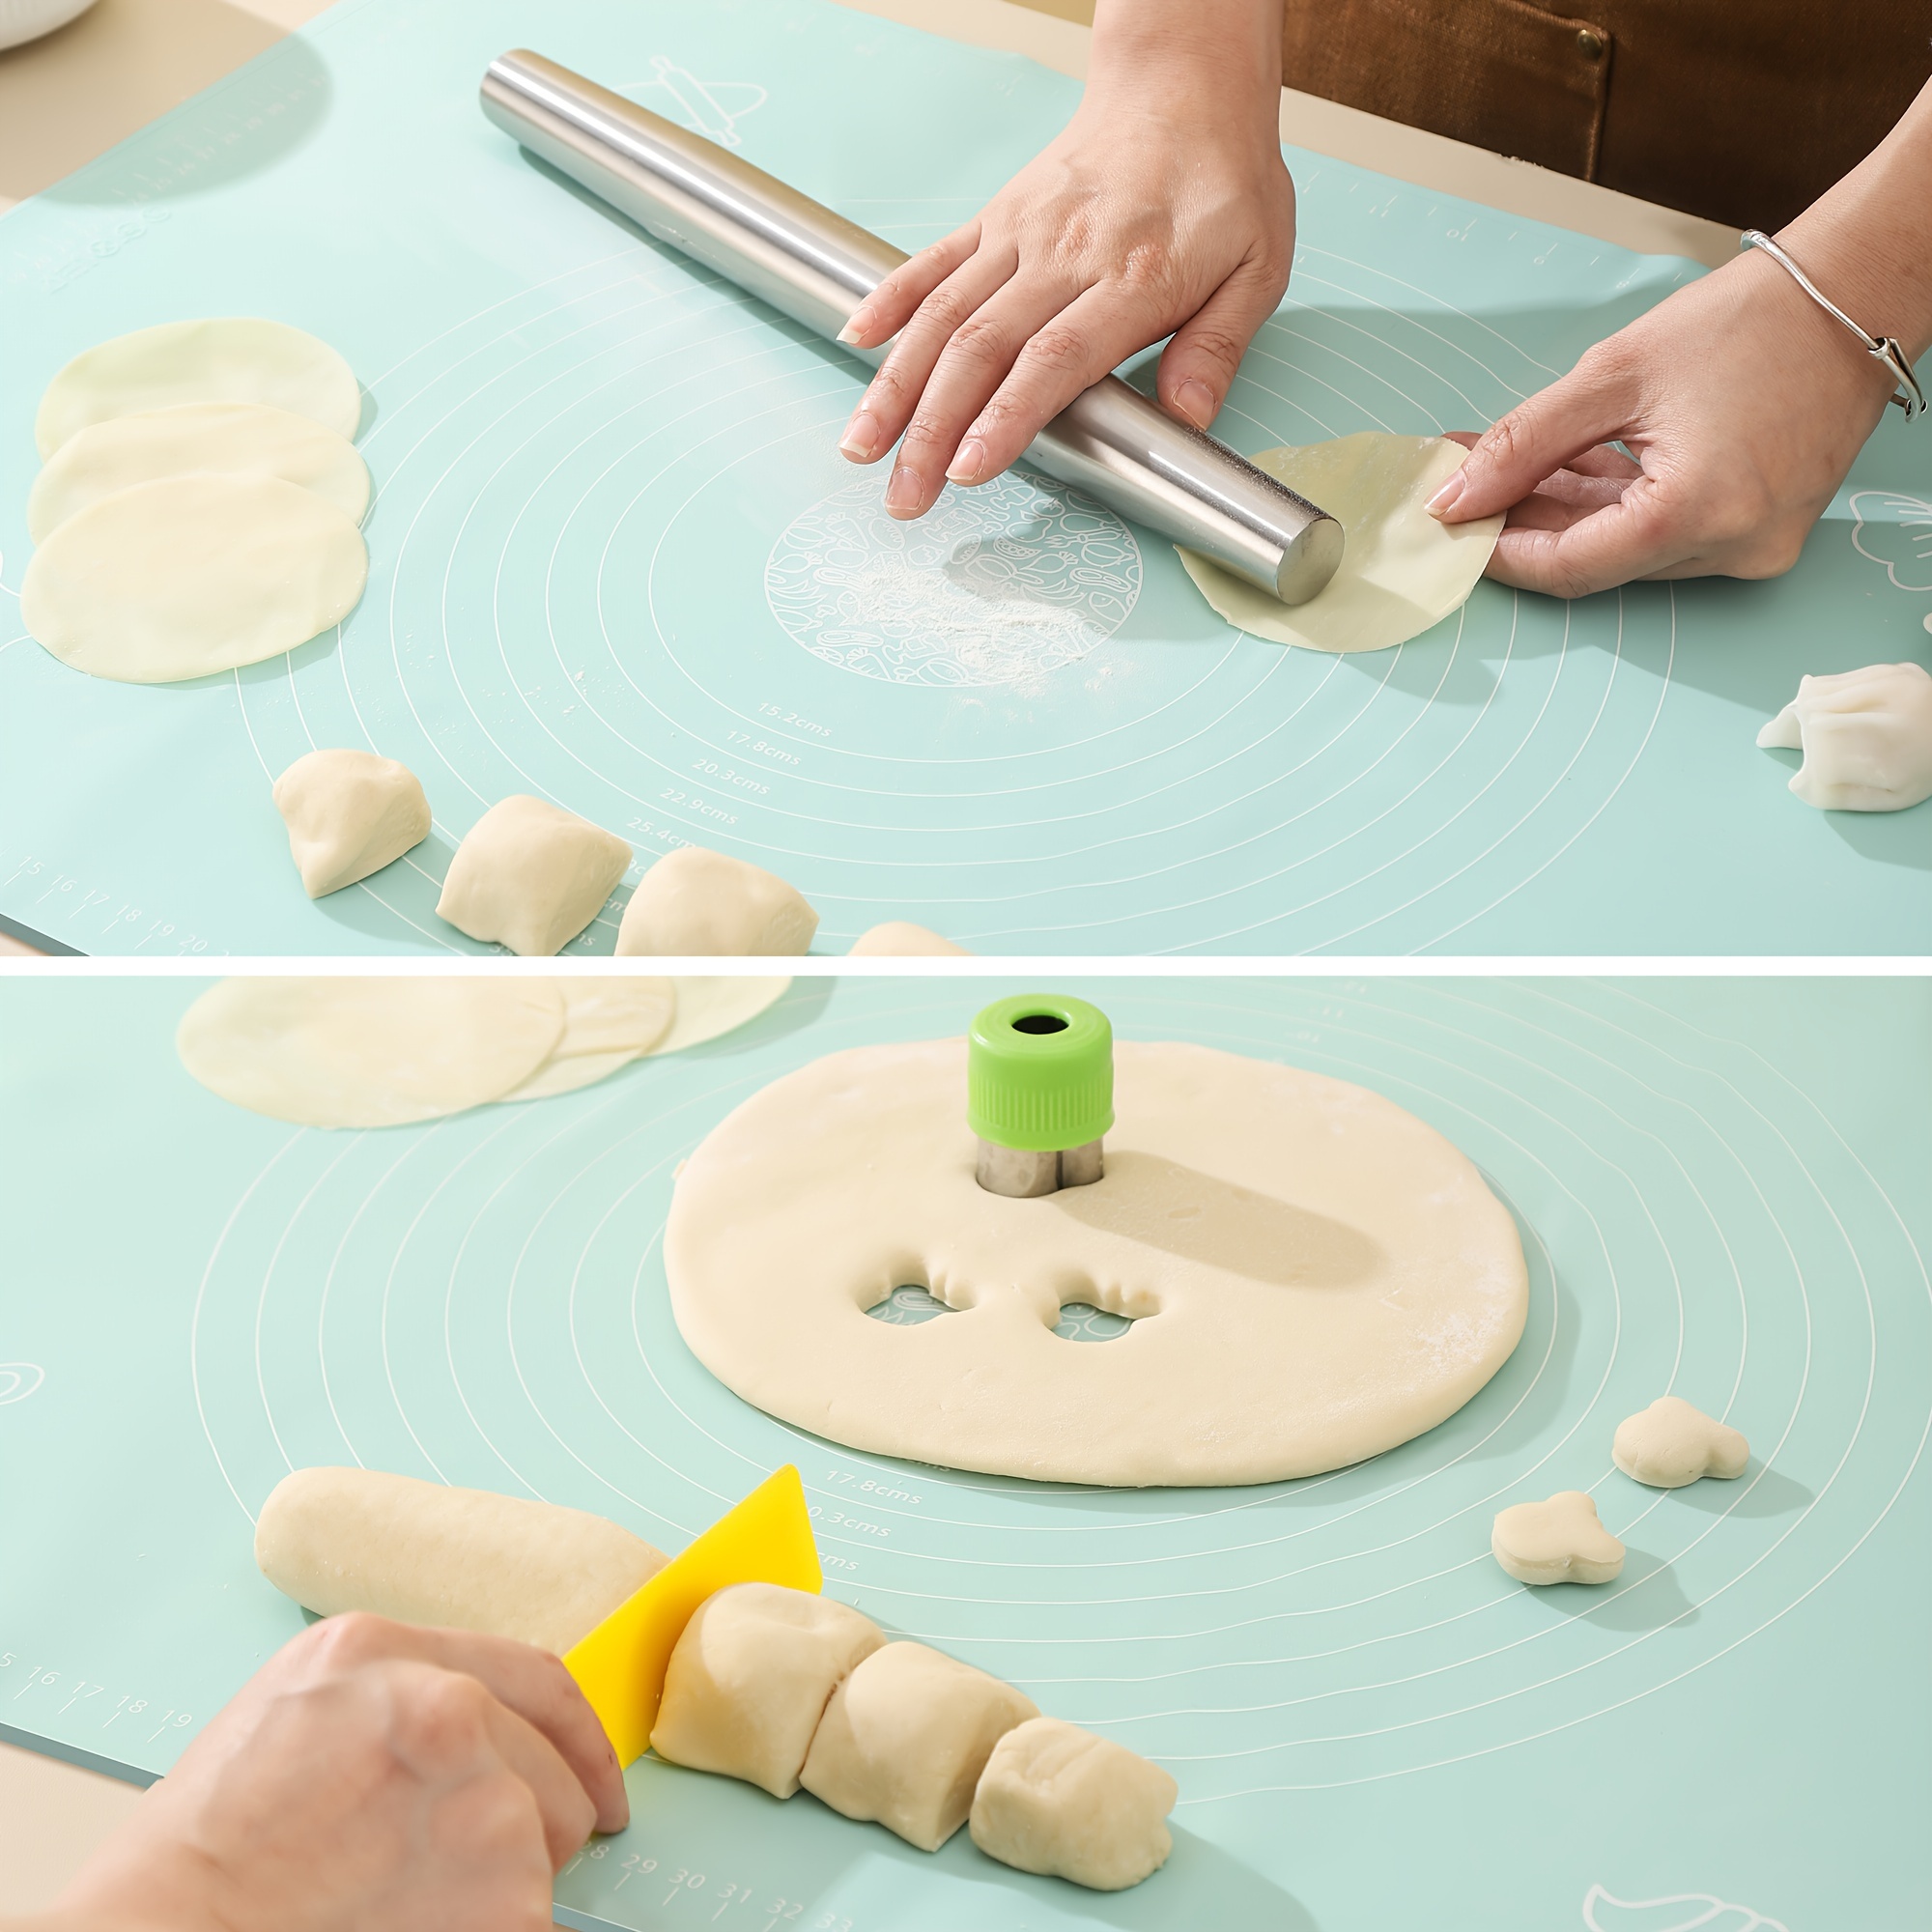  Extra Large Kitchen Silicone Pad - 2023 New Non Slip Non Stick  Silicone Pastry Mats for Rolling Out Dough, Baking Mats Silicone for Baking  Cookie Sheets, Thick Heat Resistant Mat for